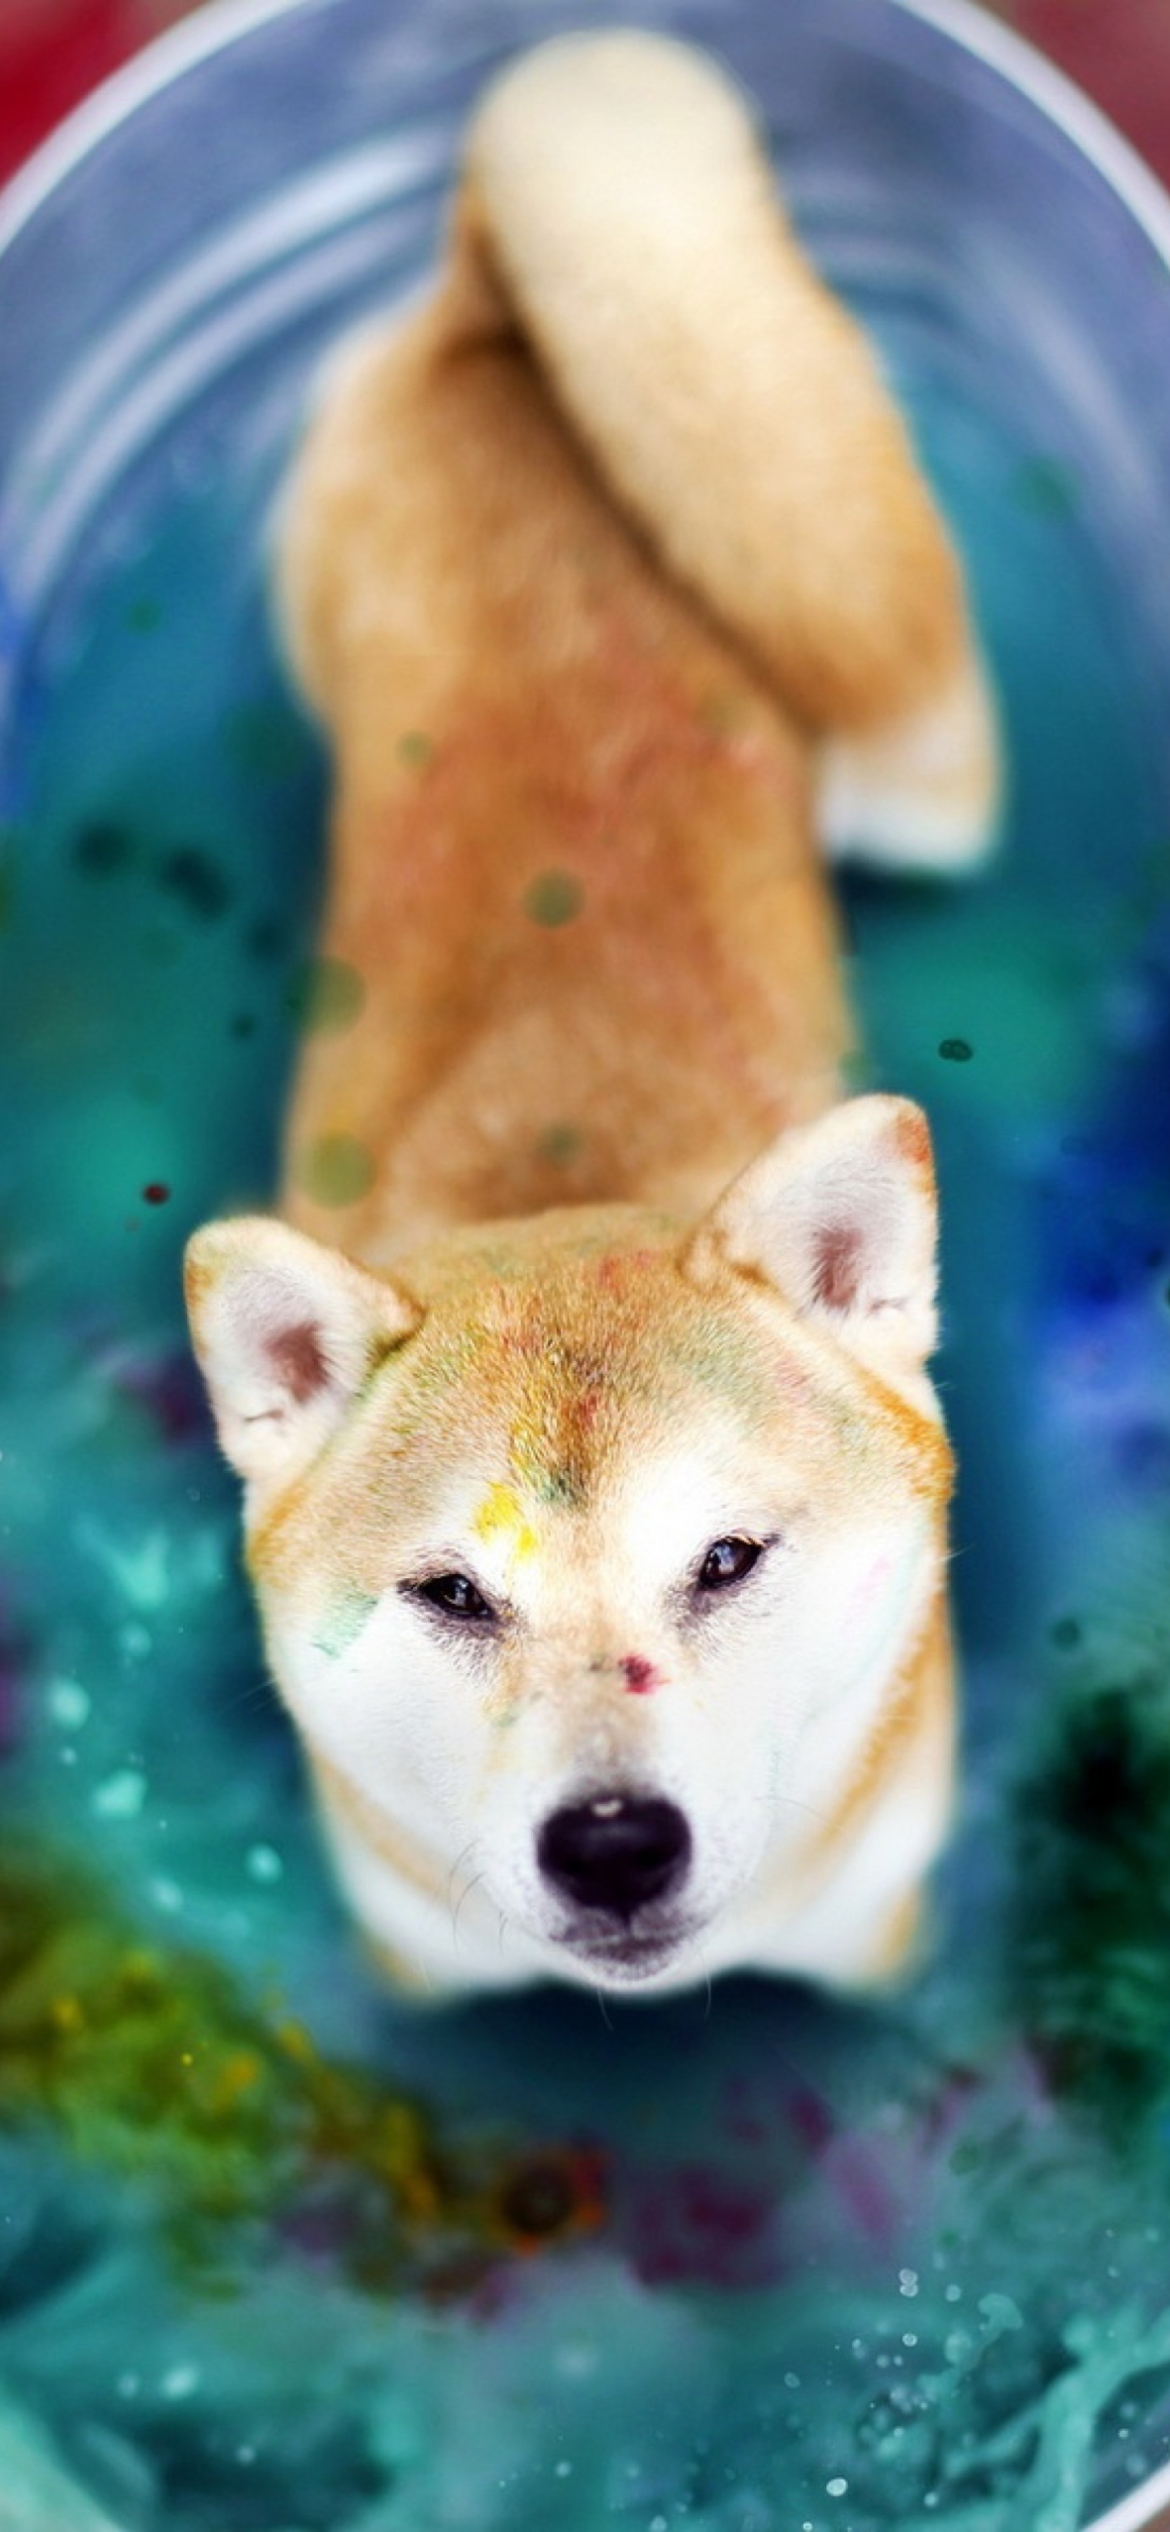 Dog And Colors wallpaper 1170x2532